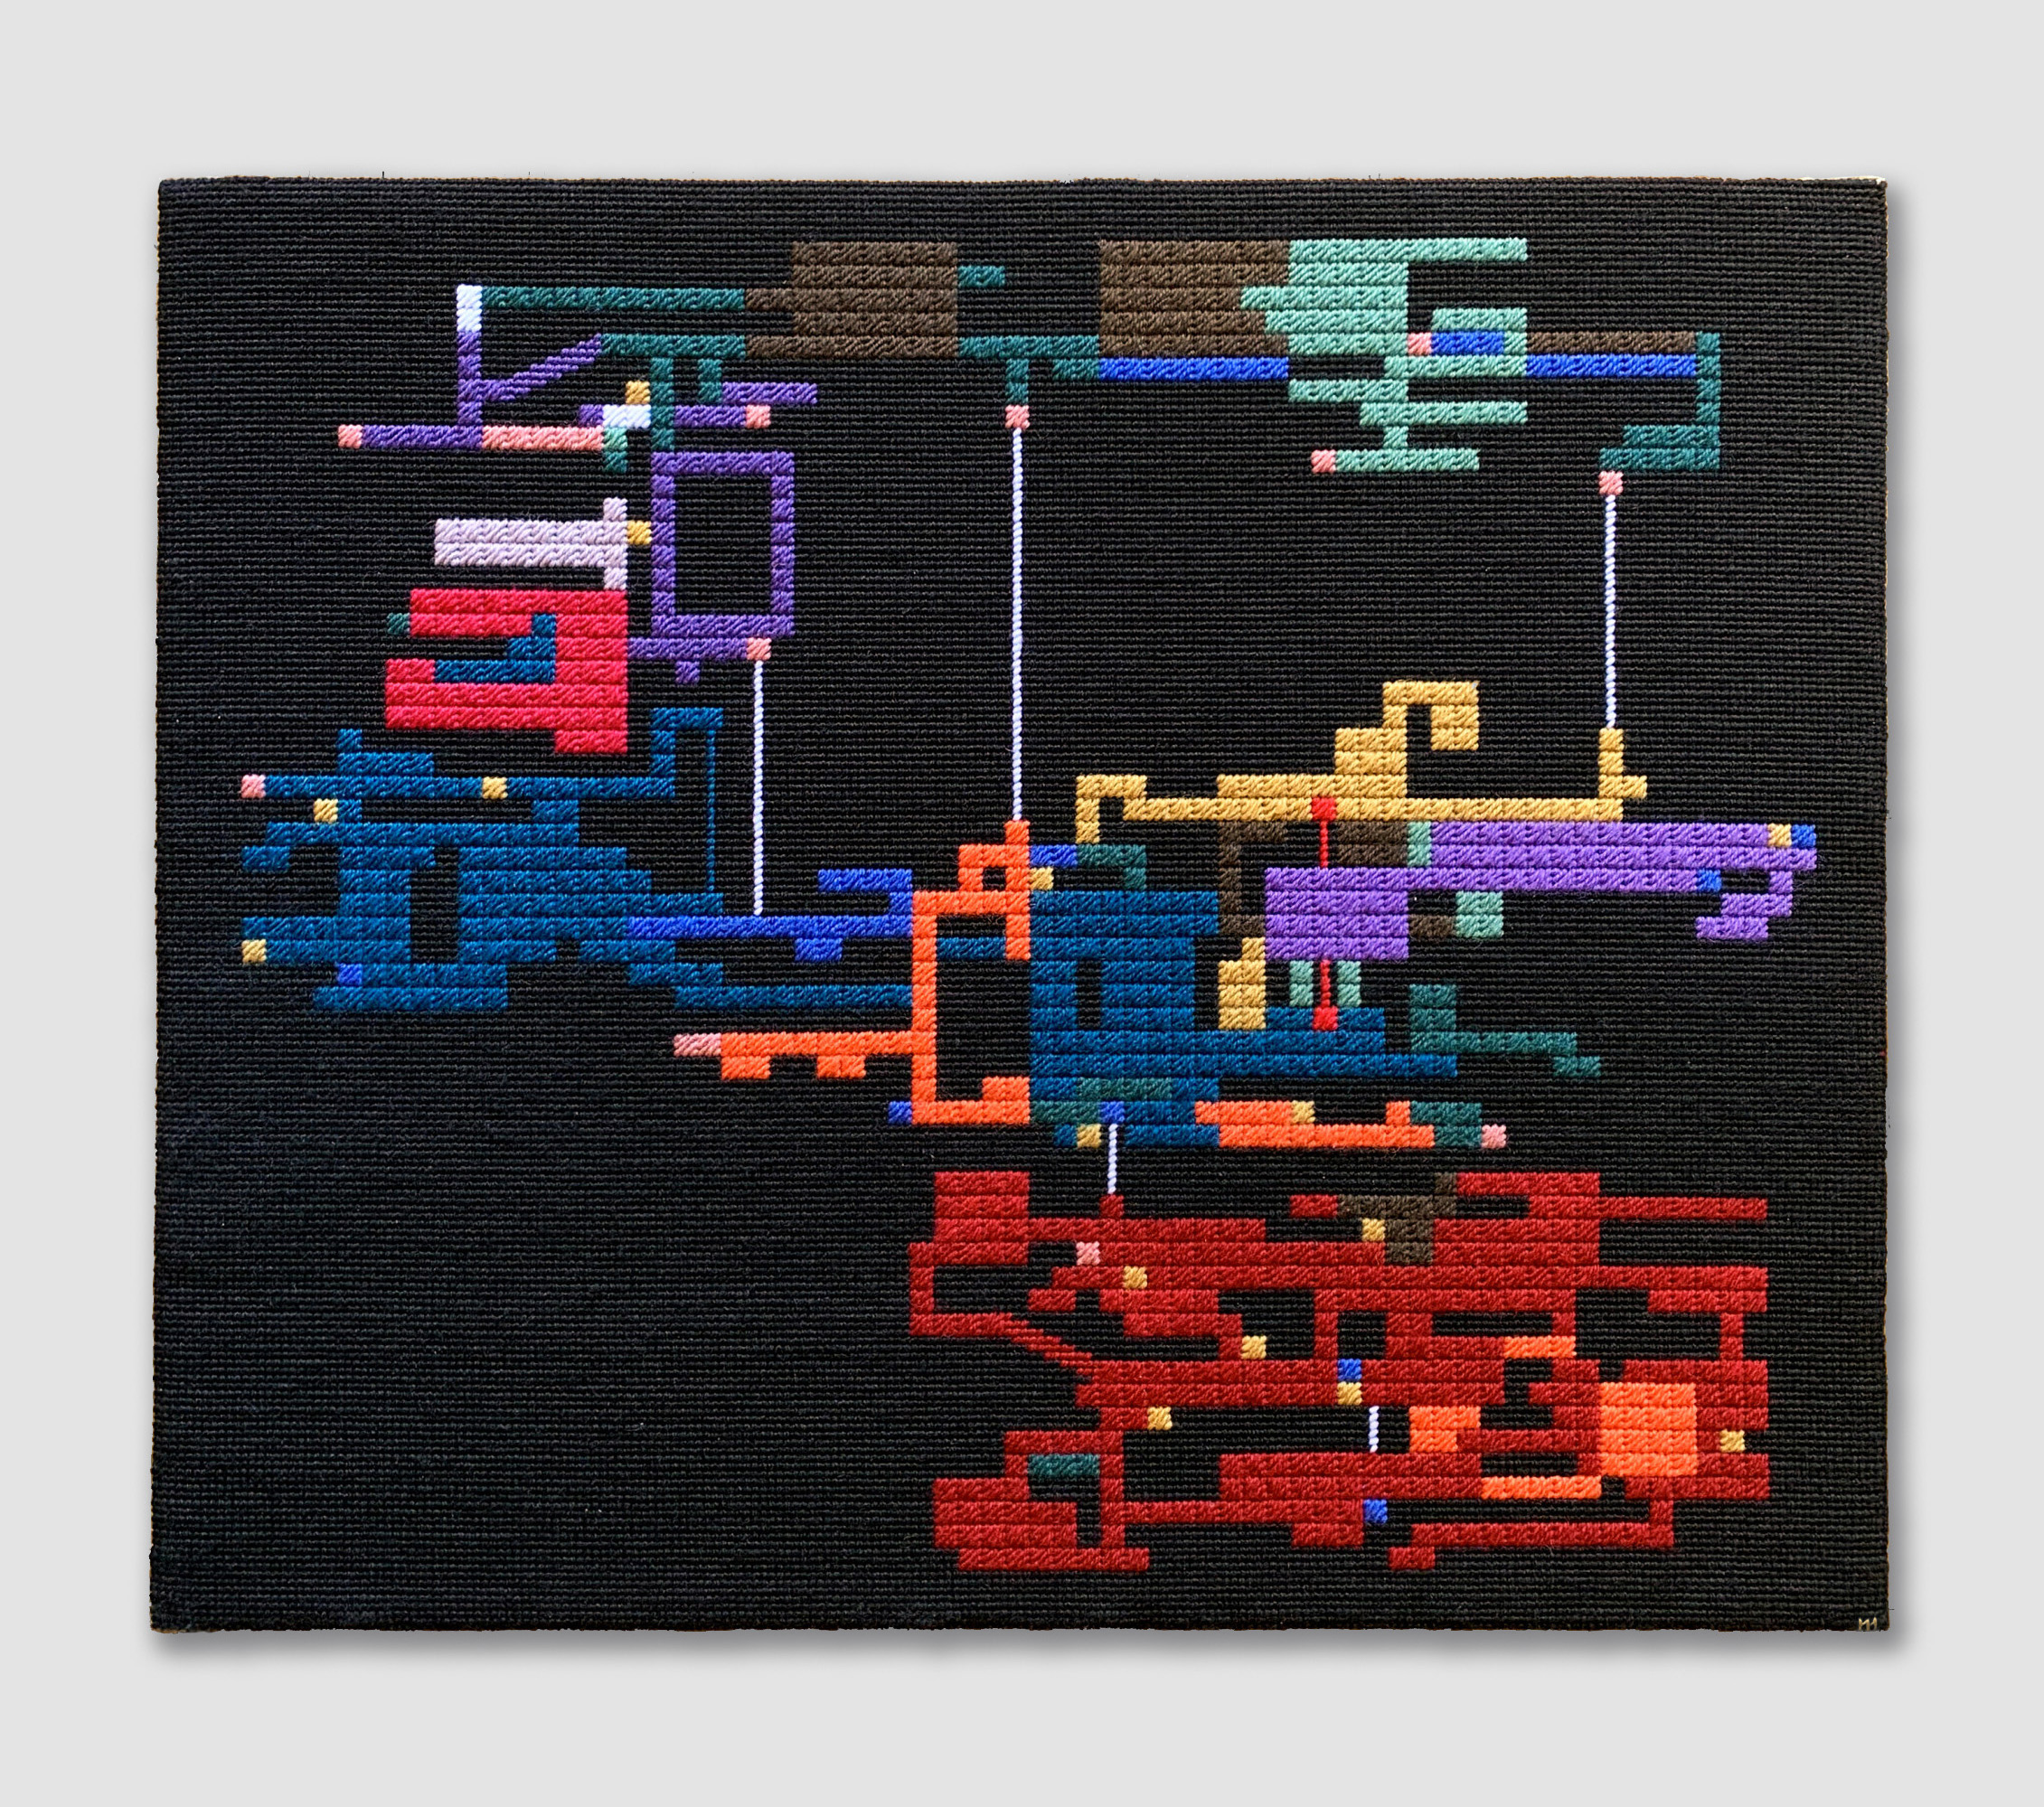  / Needlepoint of the map from *Super Metroid* video game, in its SNES version. Art by artist Marine Beaufils.